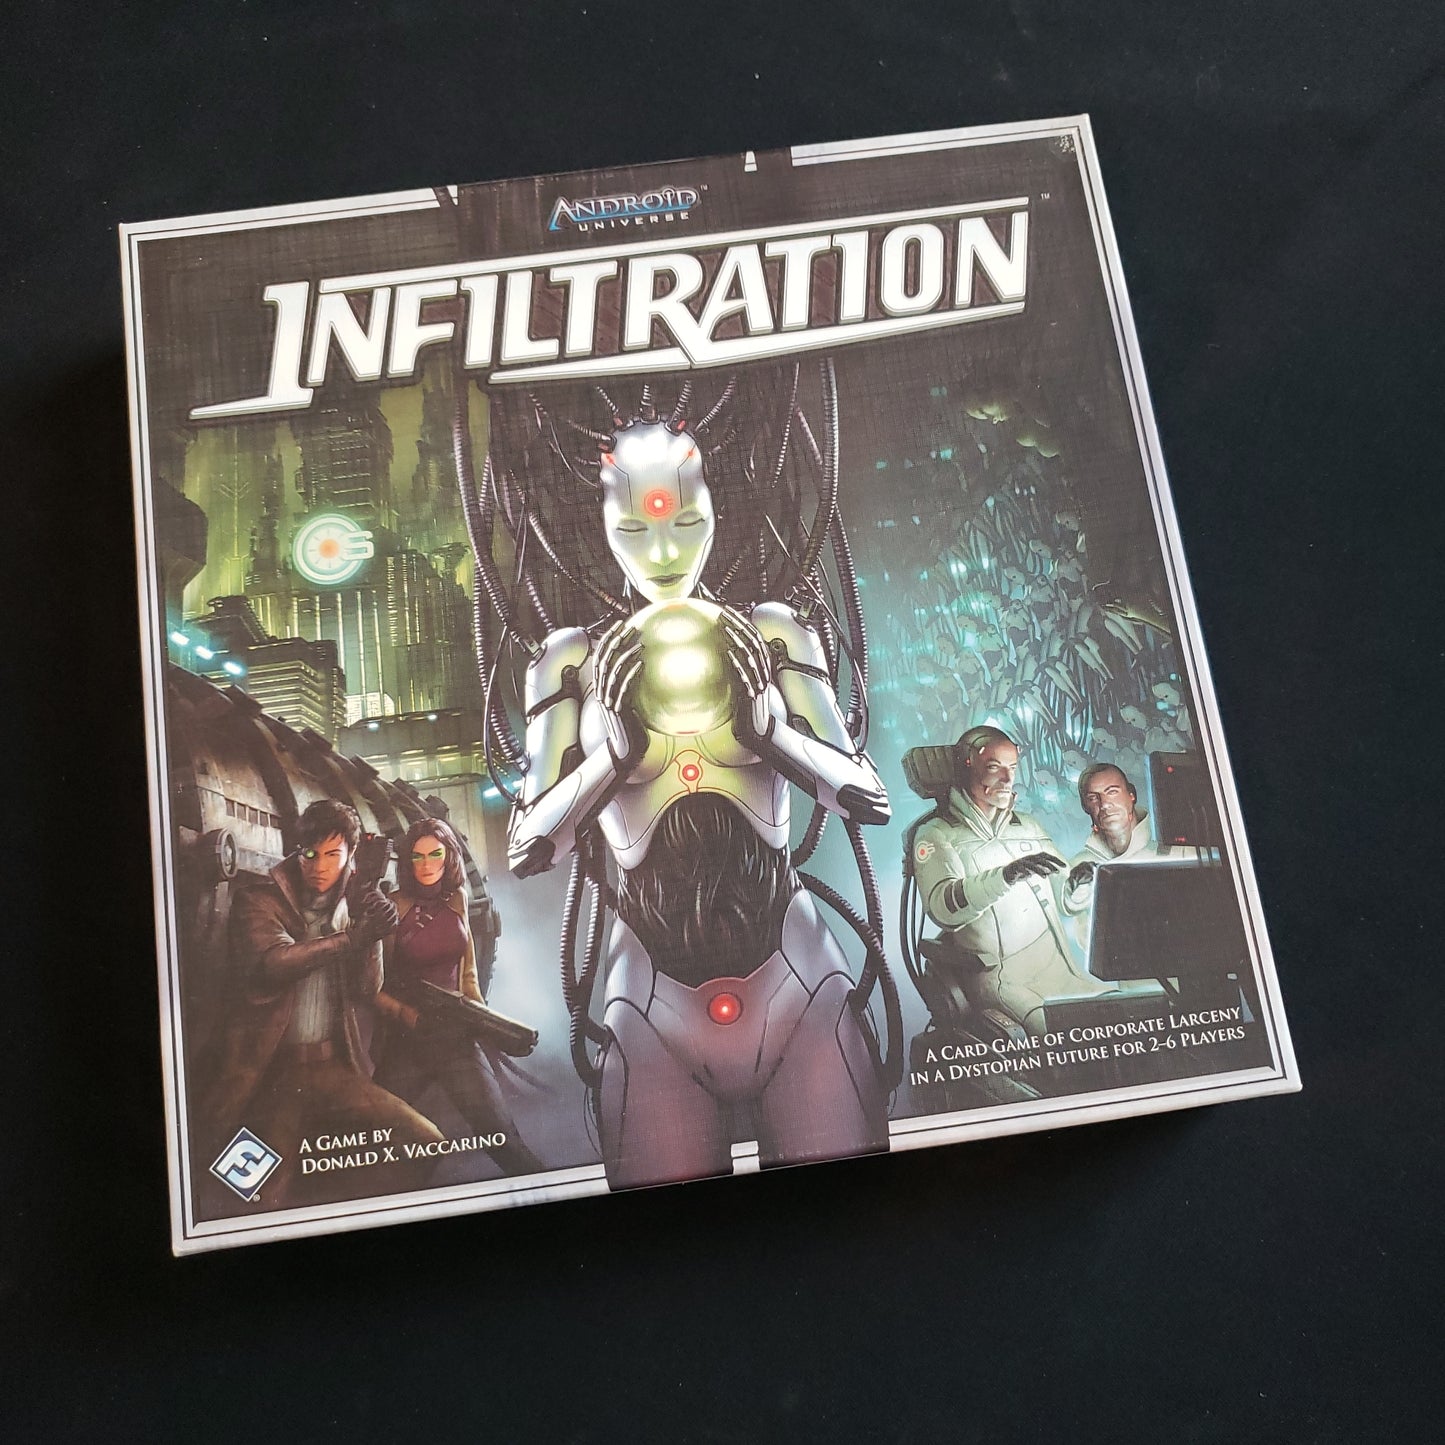 Image shows the front cover of the box of the Android: Infiltration board game